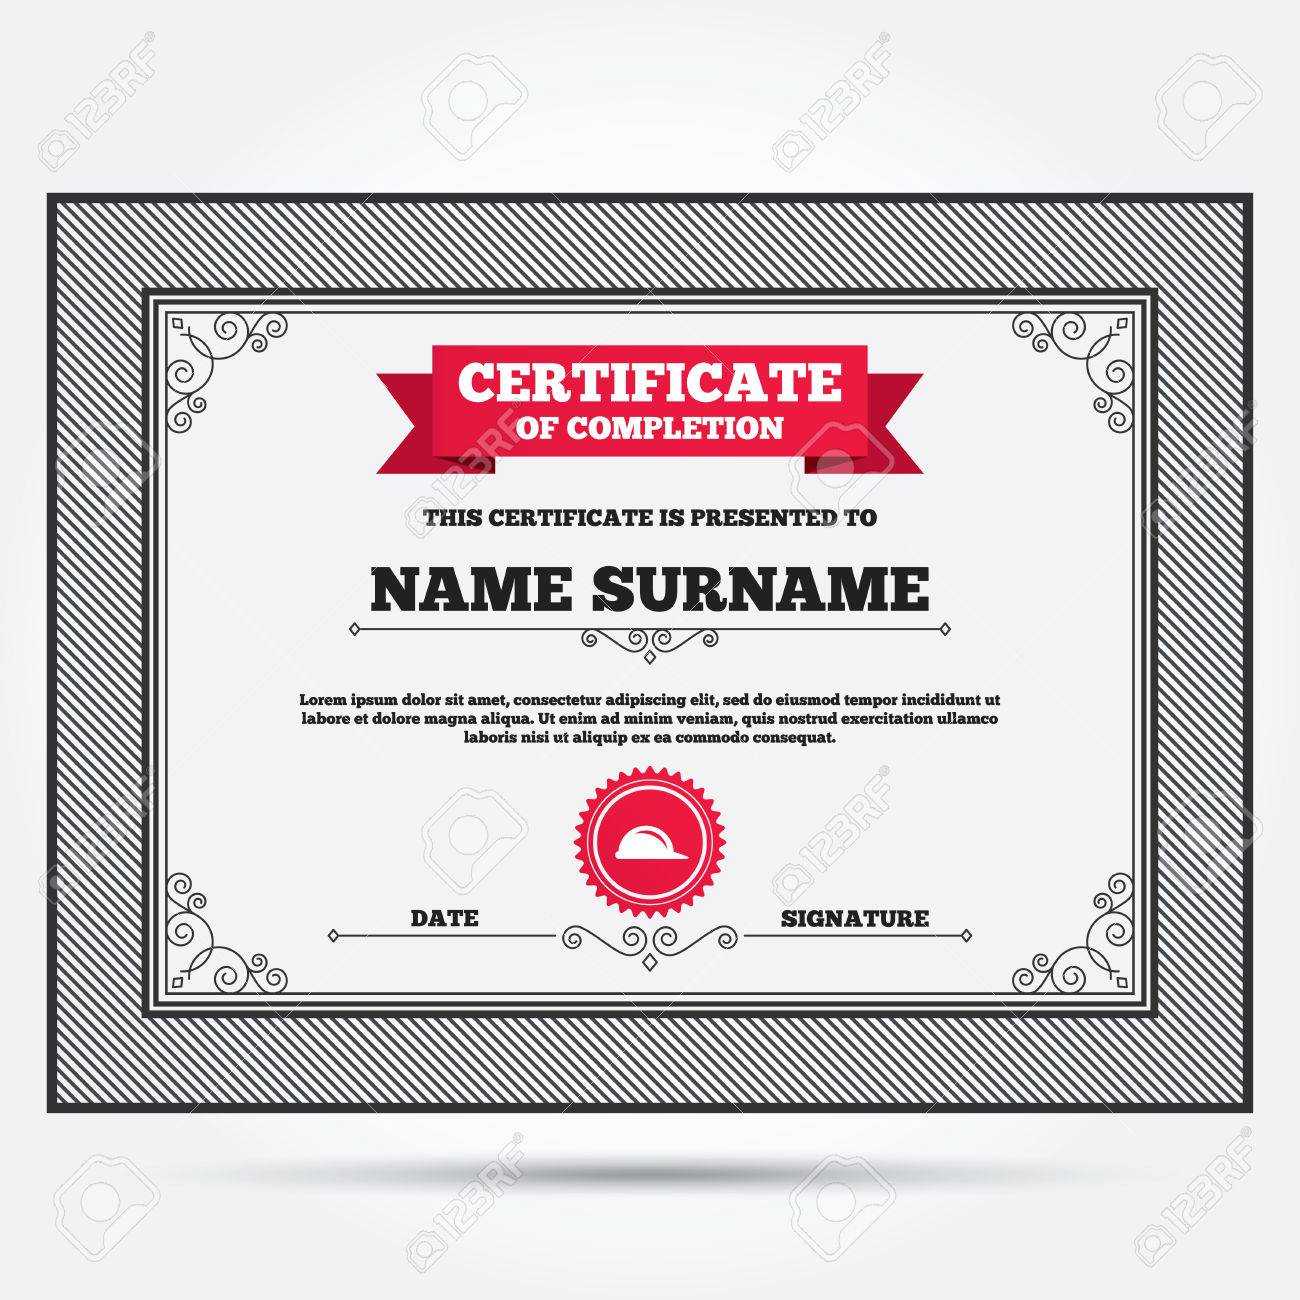 Certificate Of Completion. Hard Hat Sign Icon. Construction Helmet.. Pertaining To Certificate Of Completion Template Construction